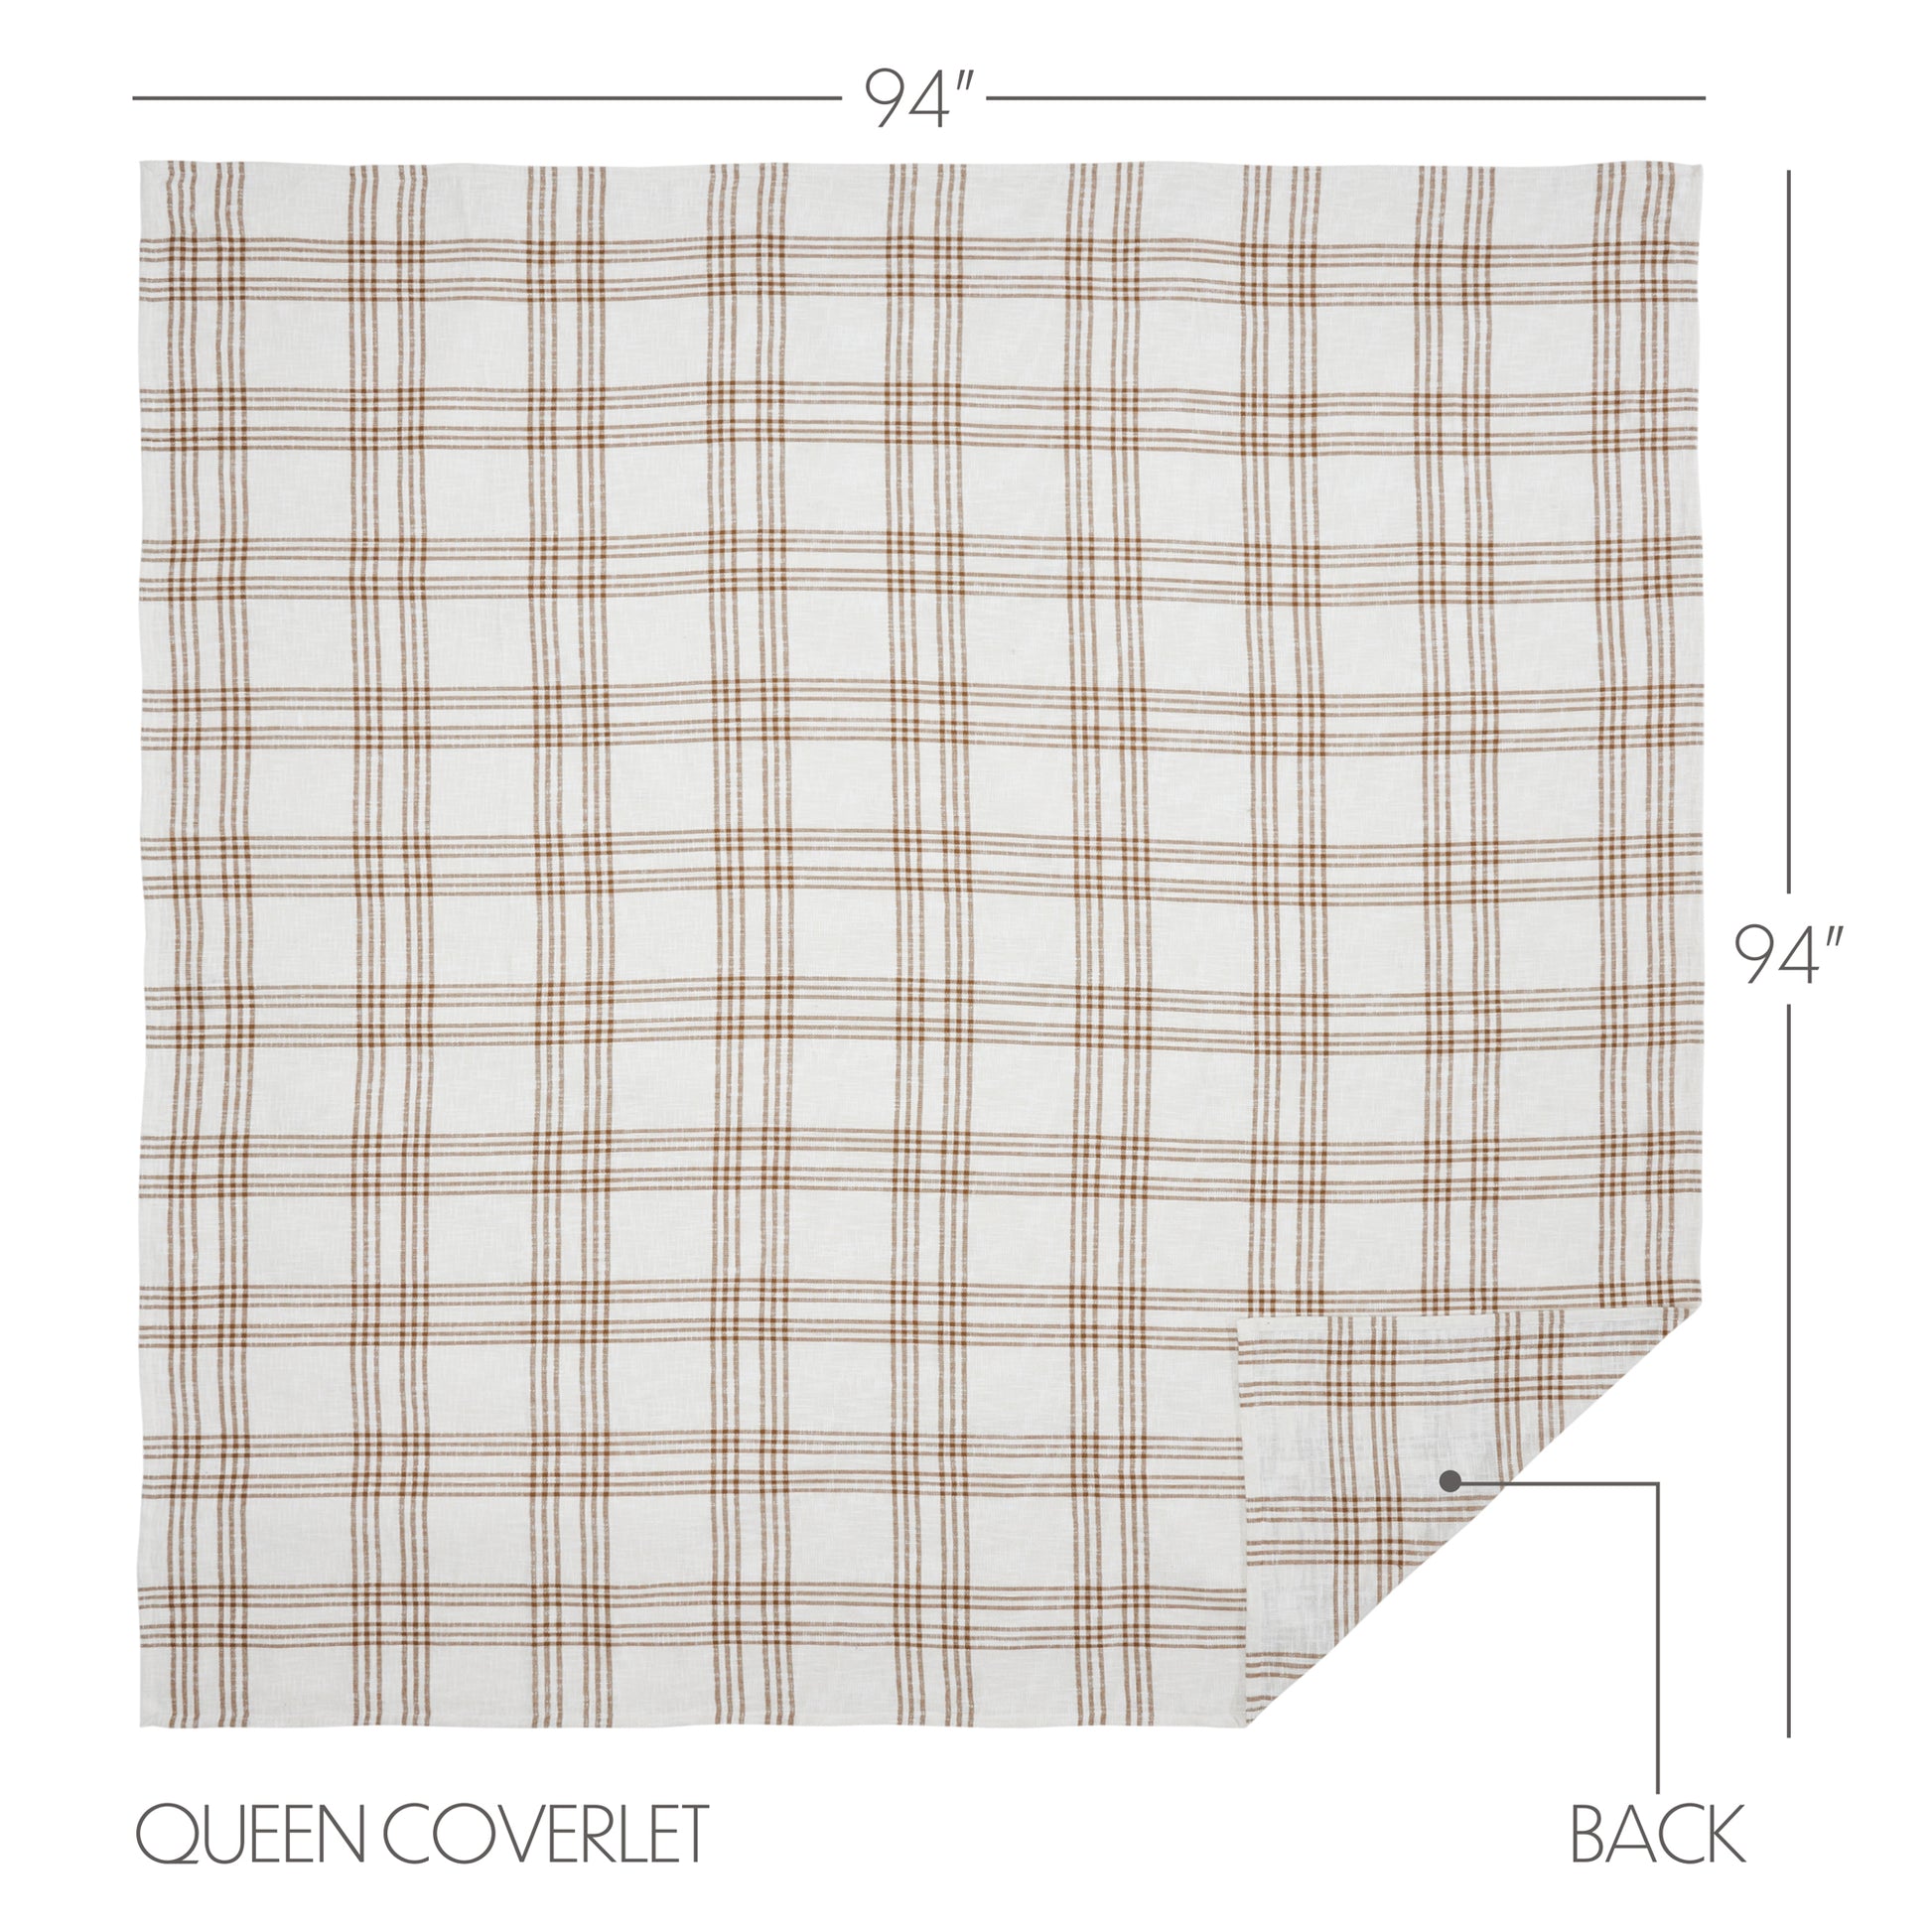 80533-Wheat-Plaid-Queen-Coverlet-94x94-image-1